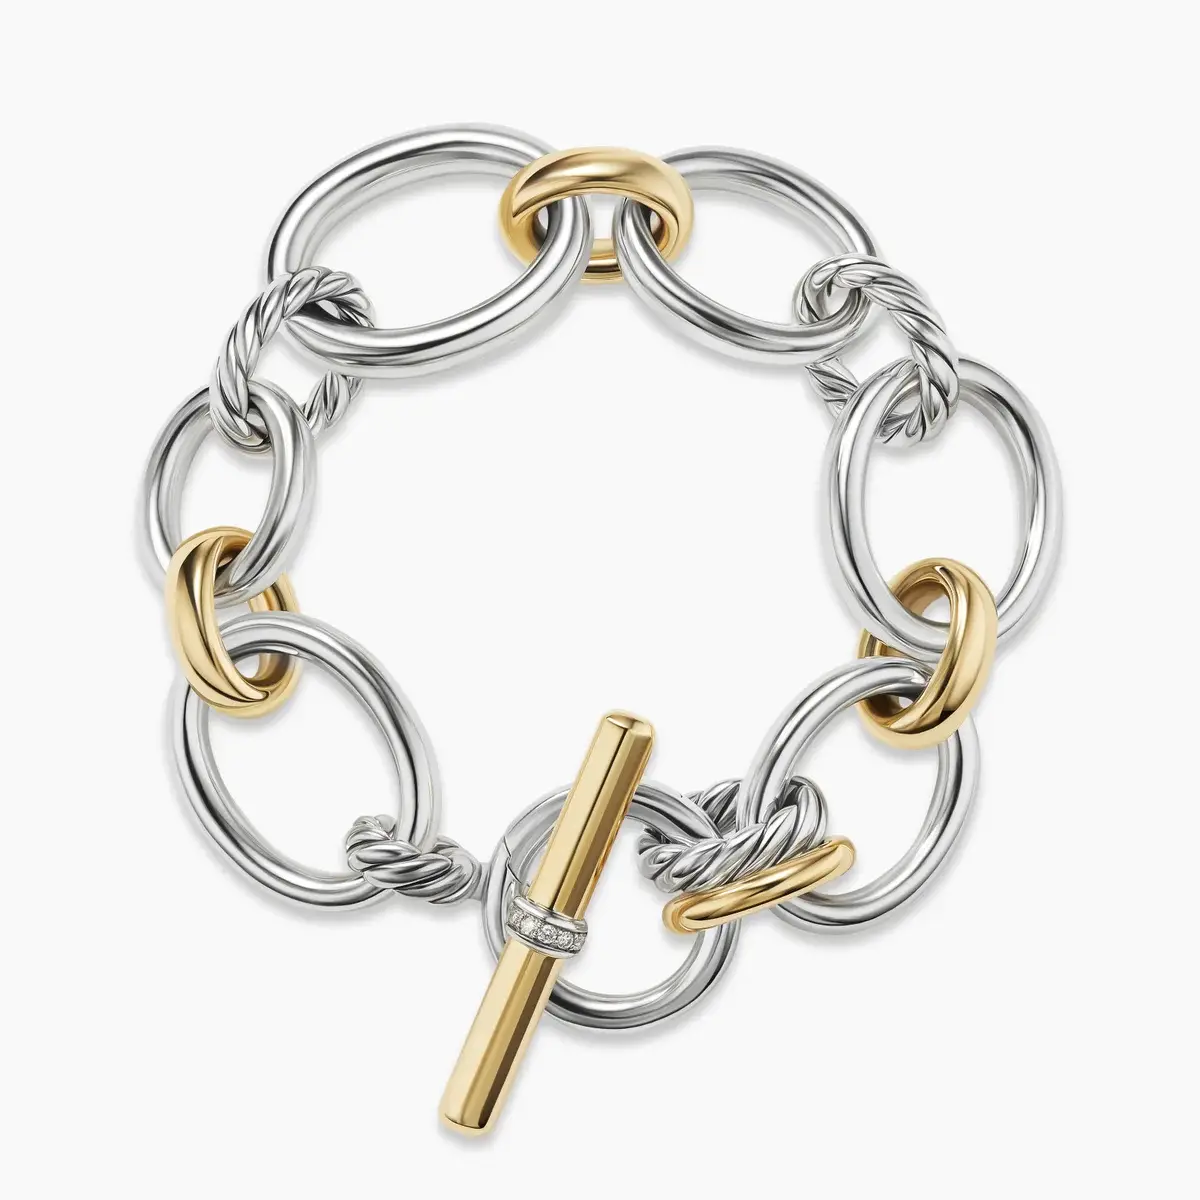 DY Mercer Chain Bracelet in Sterling Silver with 18K Yellow Gold and Diamonds